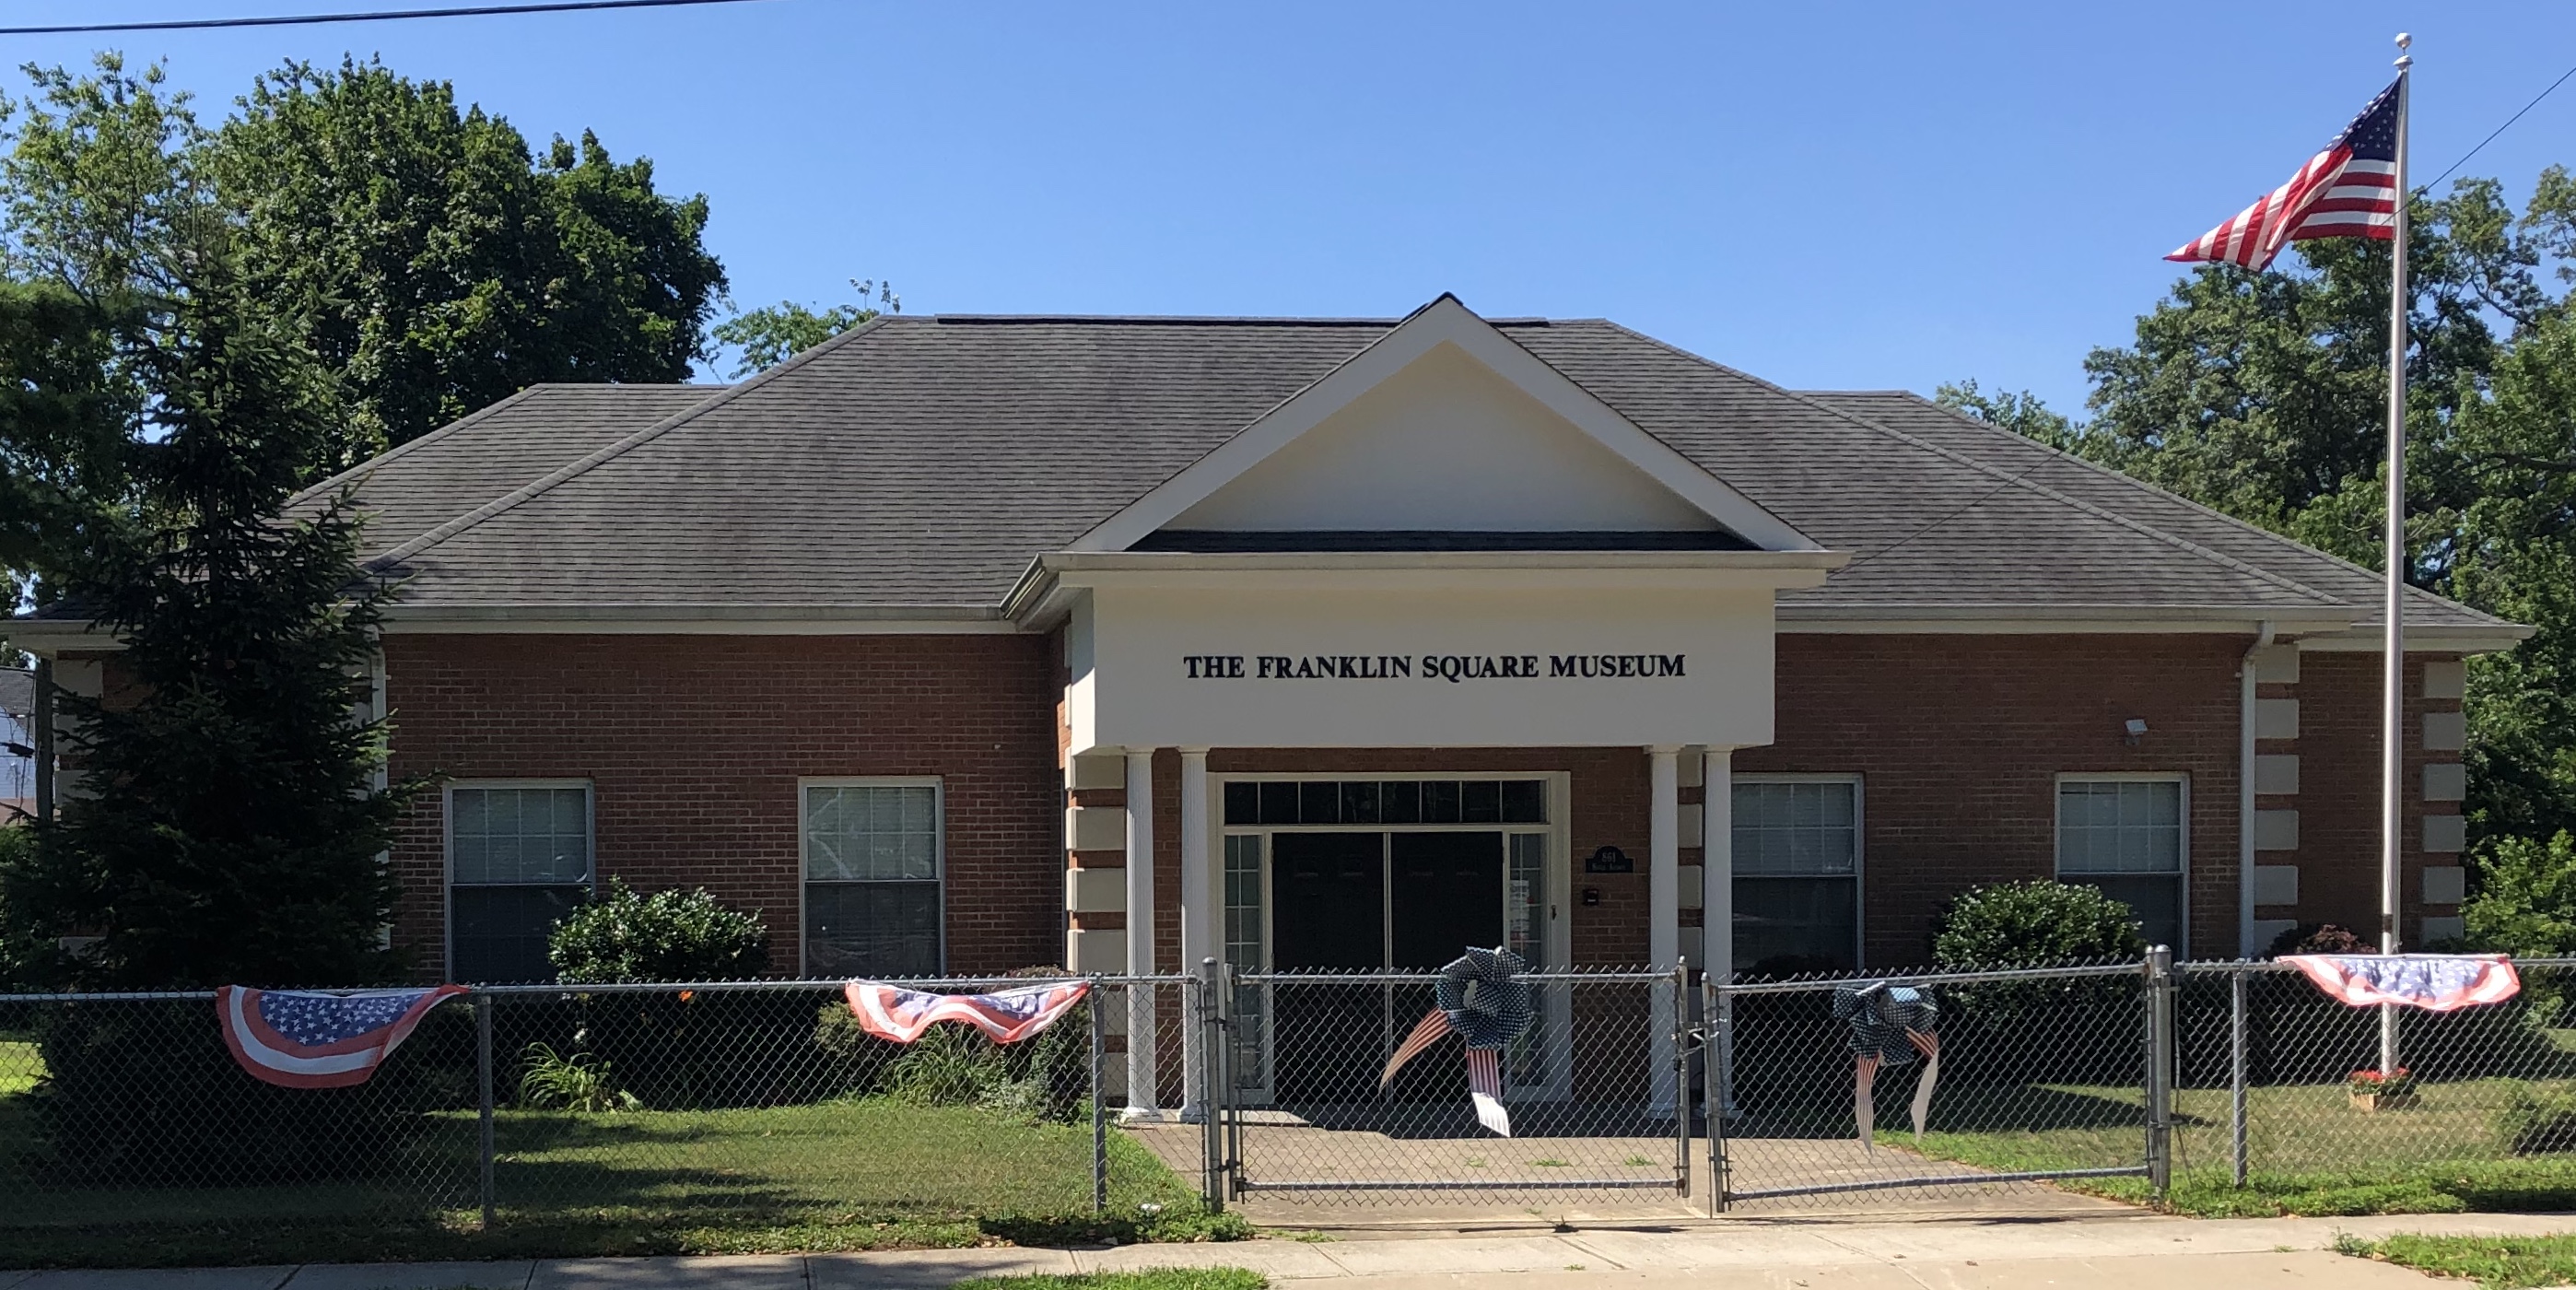 The Franklin Square Museum